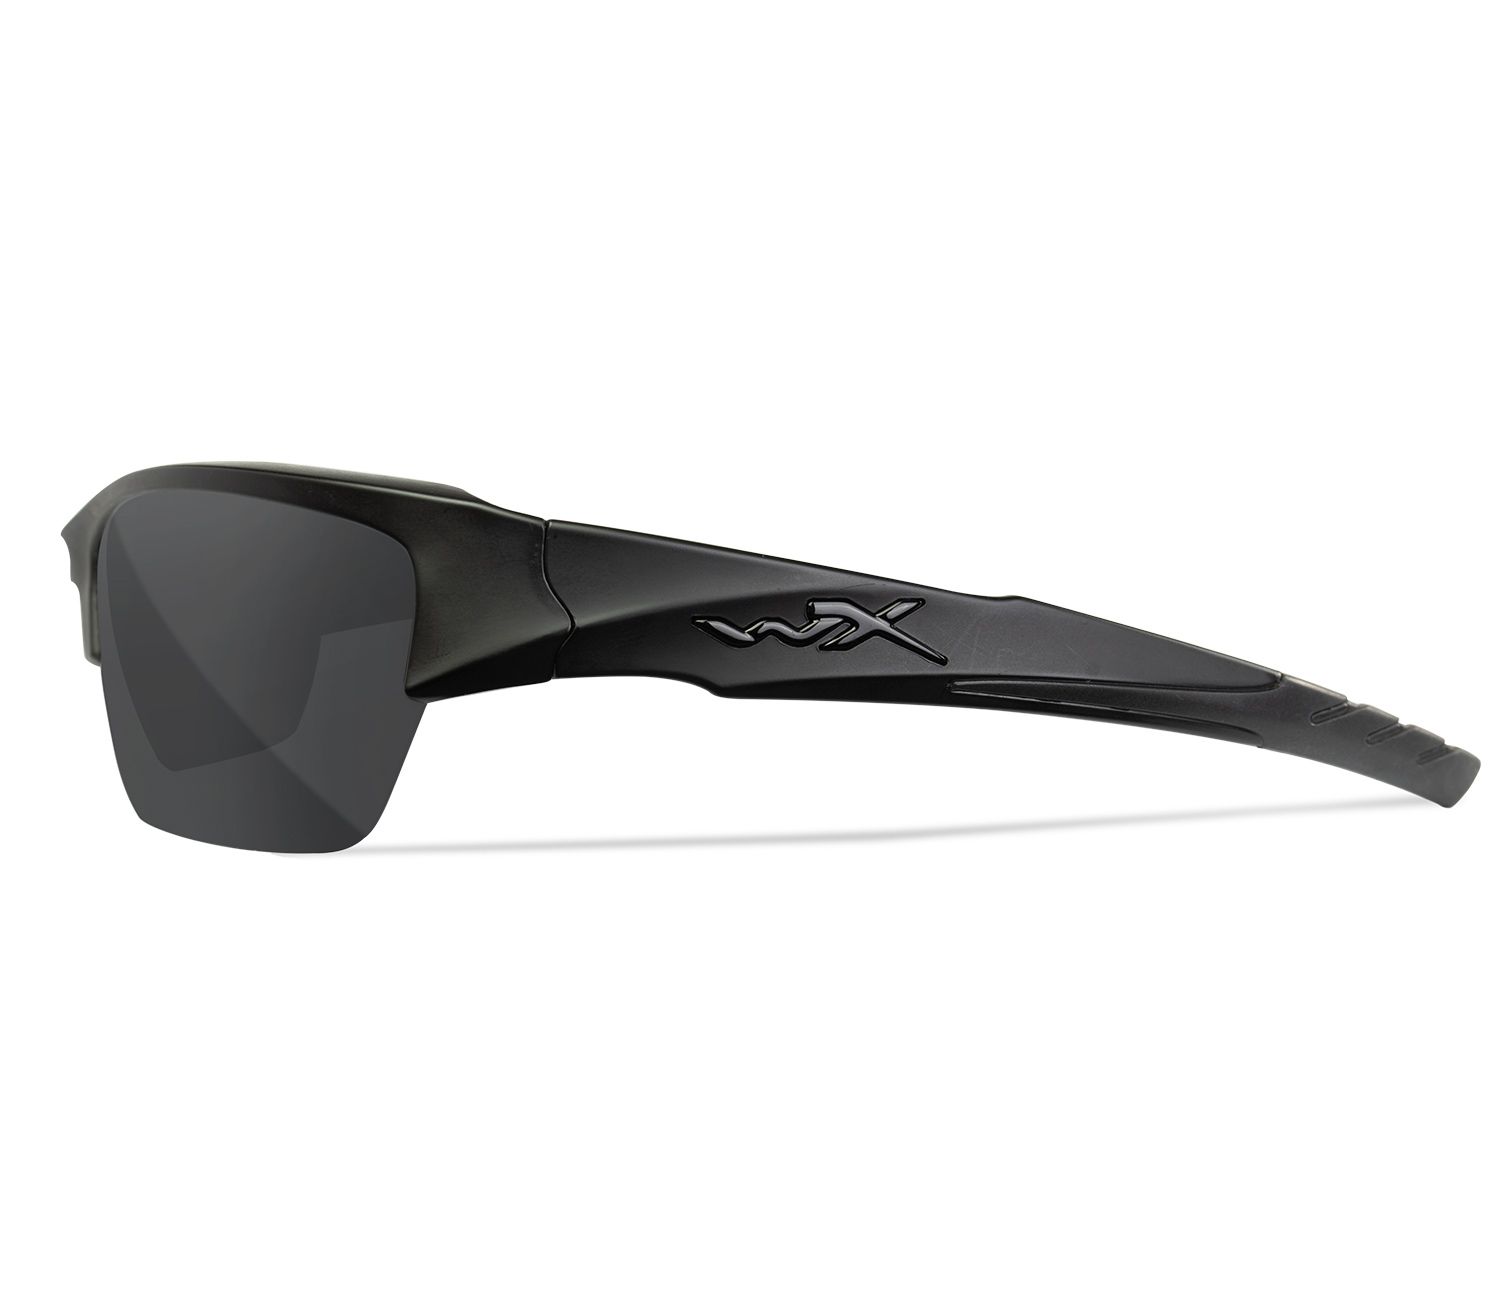 Gafas Wiley X Valor 2.5 lateral